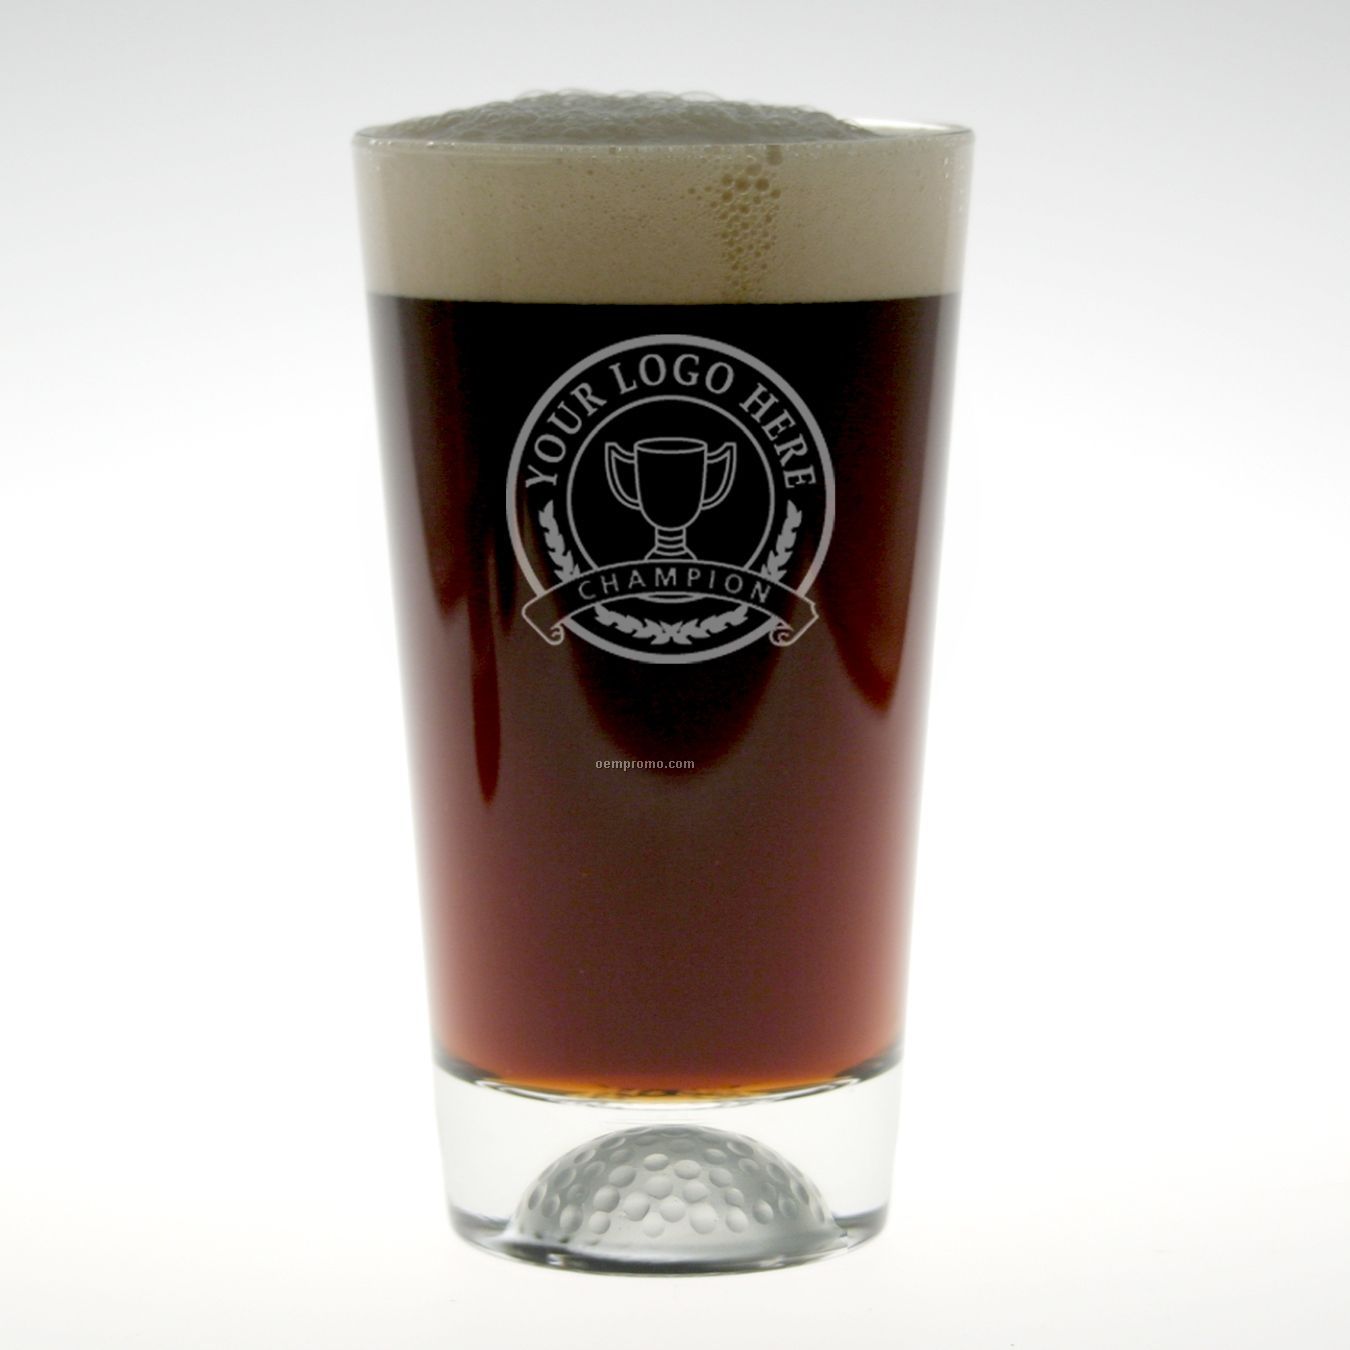 16 Oz. Fore Ale Glass (Deep Etch)